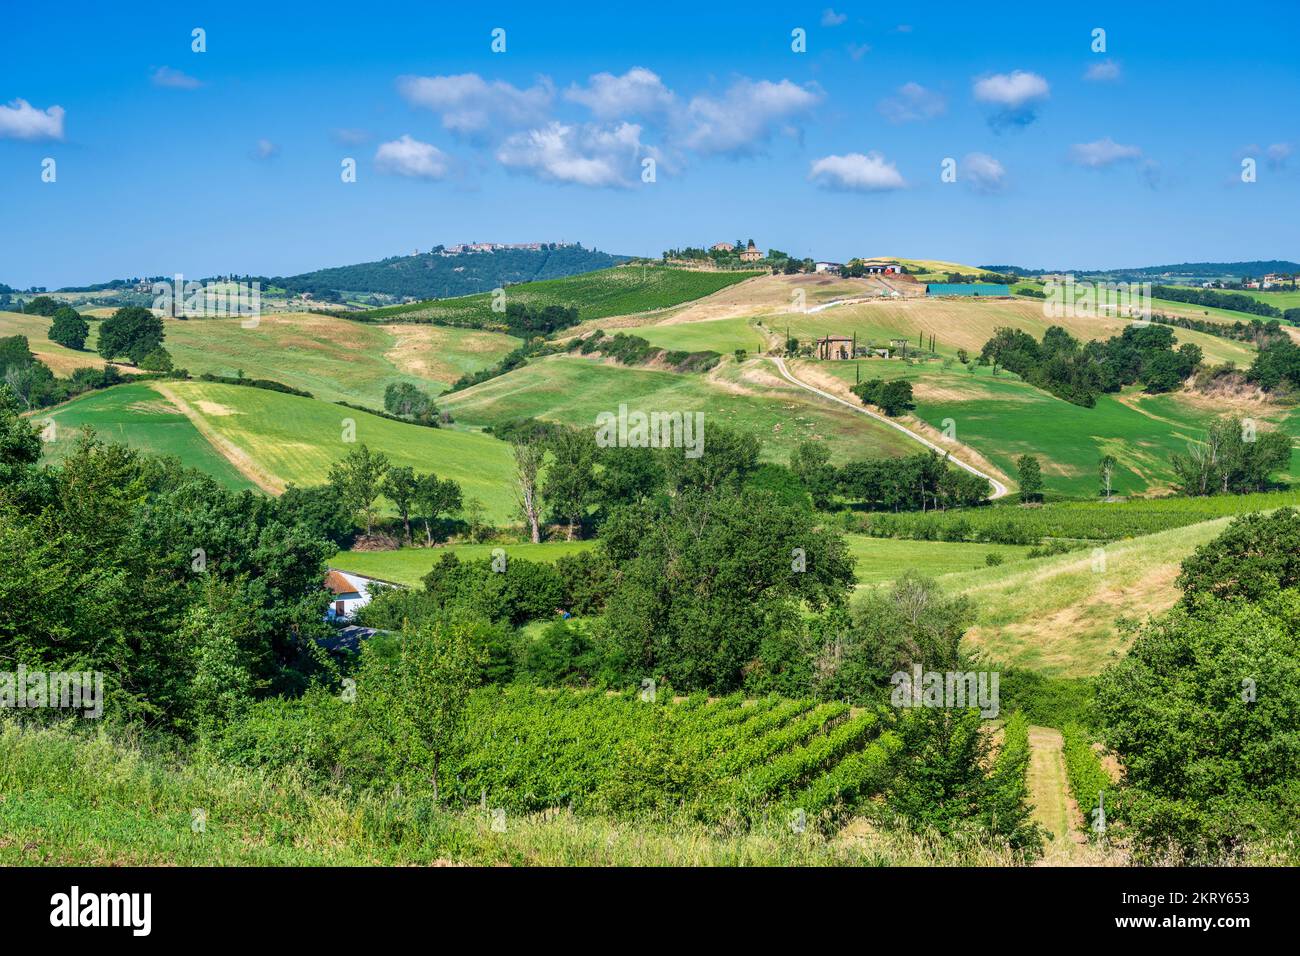 View across vineyards and rolling countryside to distant hilltop town of Montepulciano in Tuscany, Italy Stock Photo